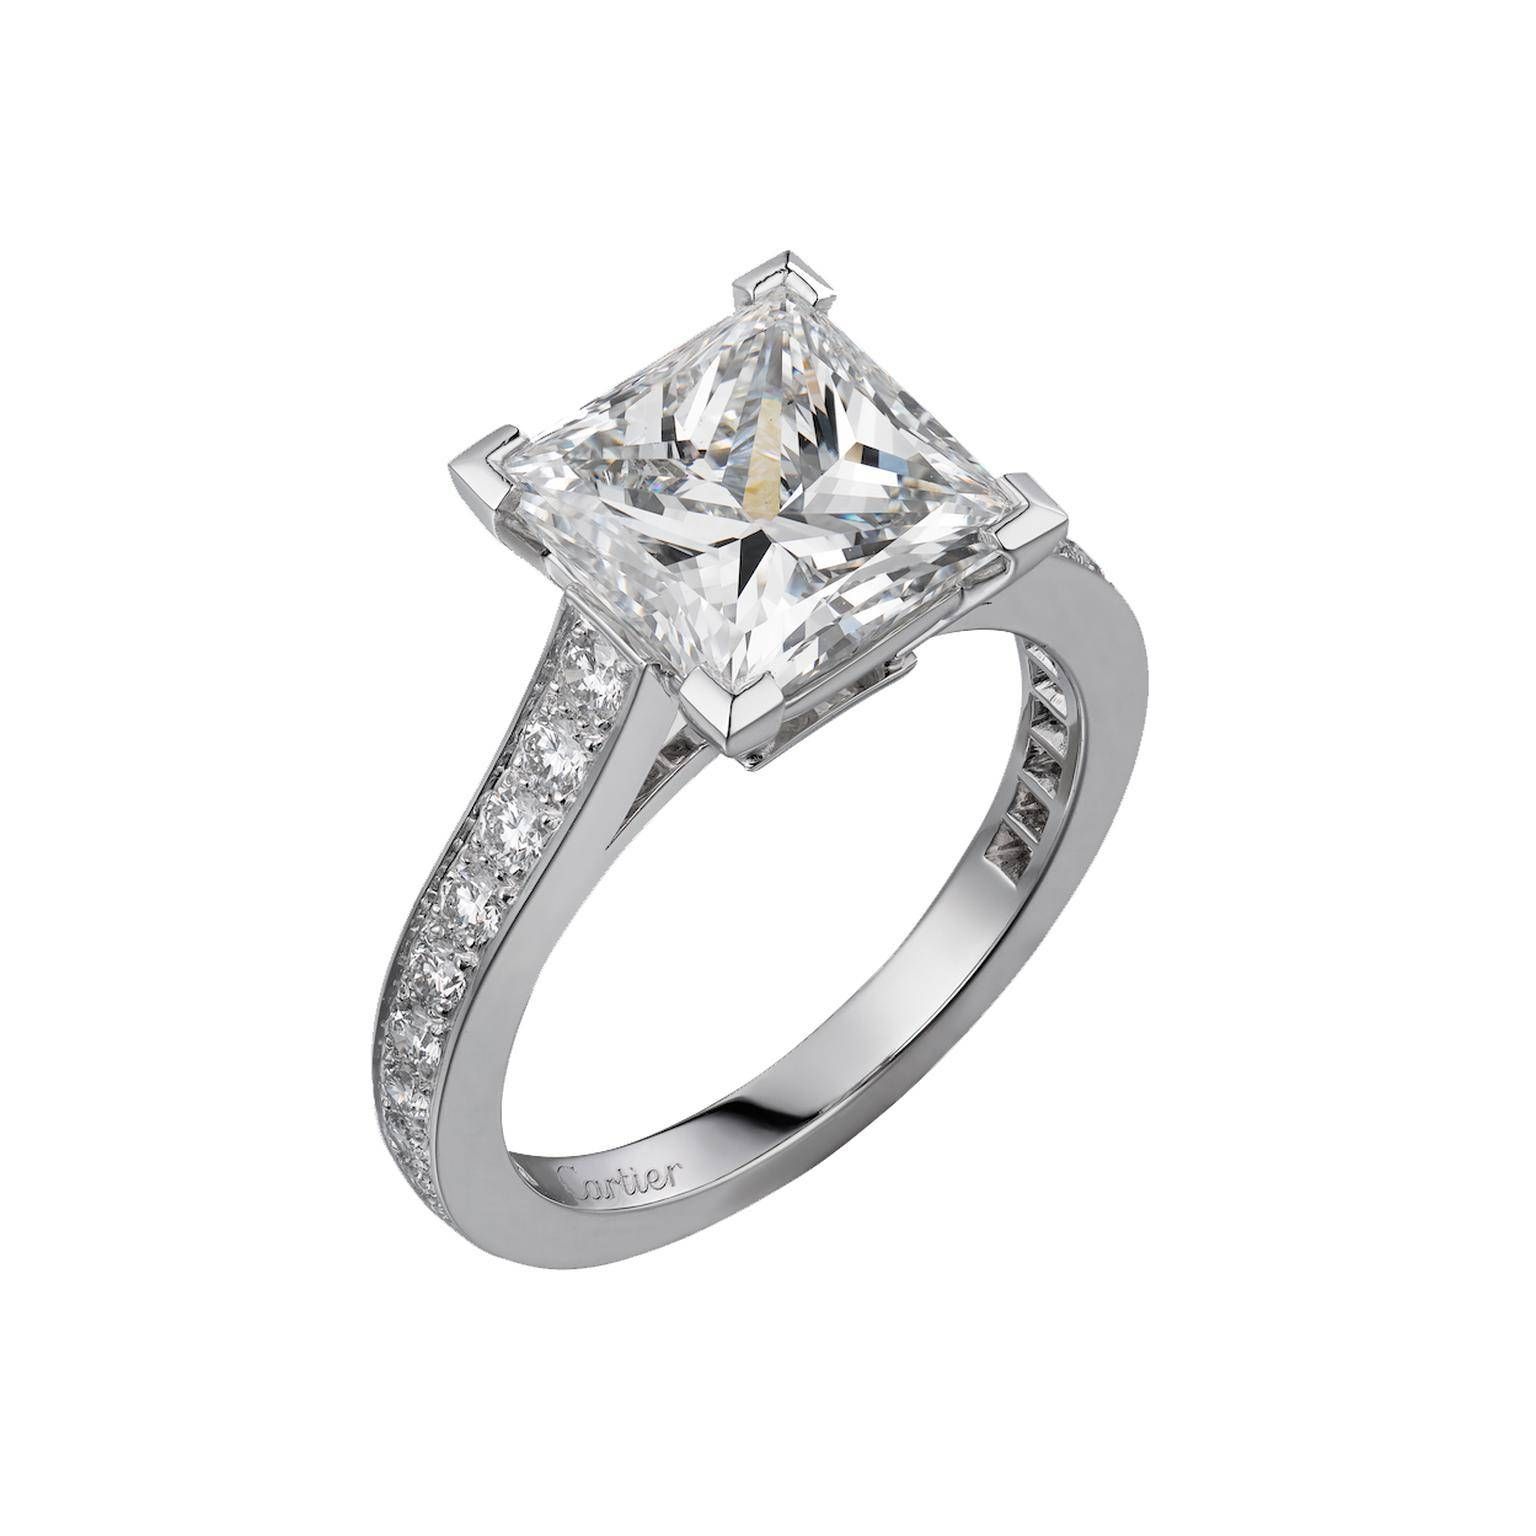 1895 Solitaire Princess Cut Diamond Engagement Ring | Cartier Pertaining To Most Recently Released Princess Cut Diamond Anniversary Rings (View 18 of 25)